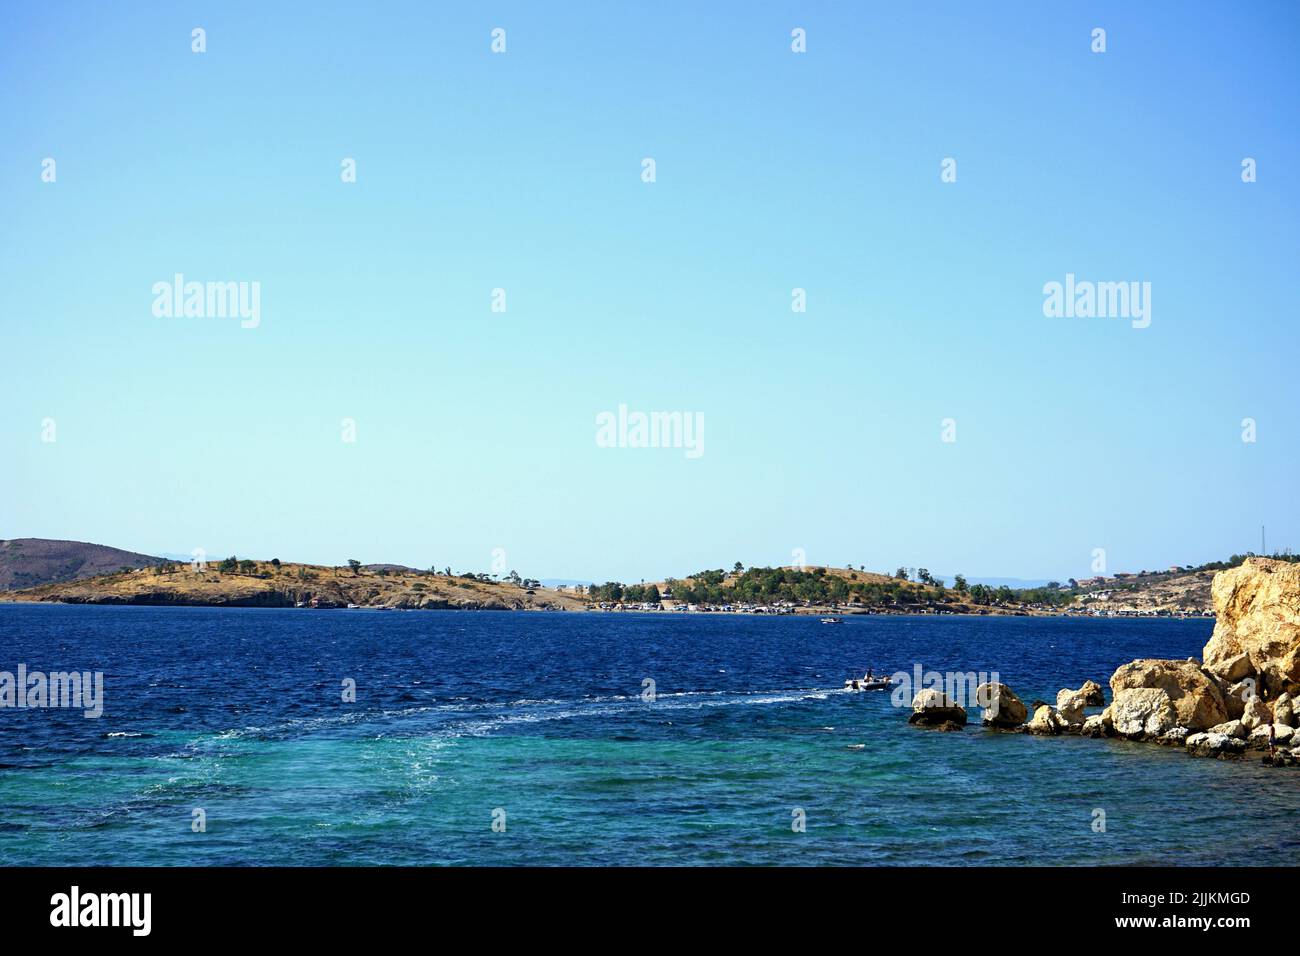 A beautiful shot of a seascape under the clear skies Stock Photo